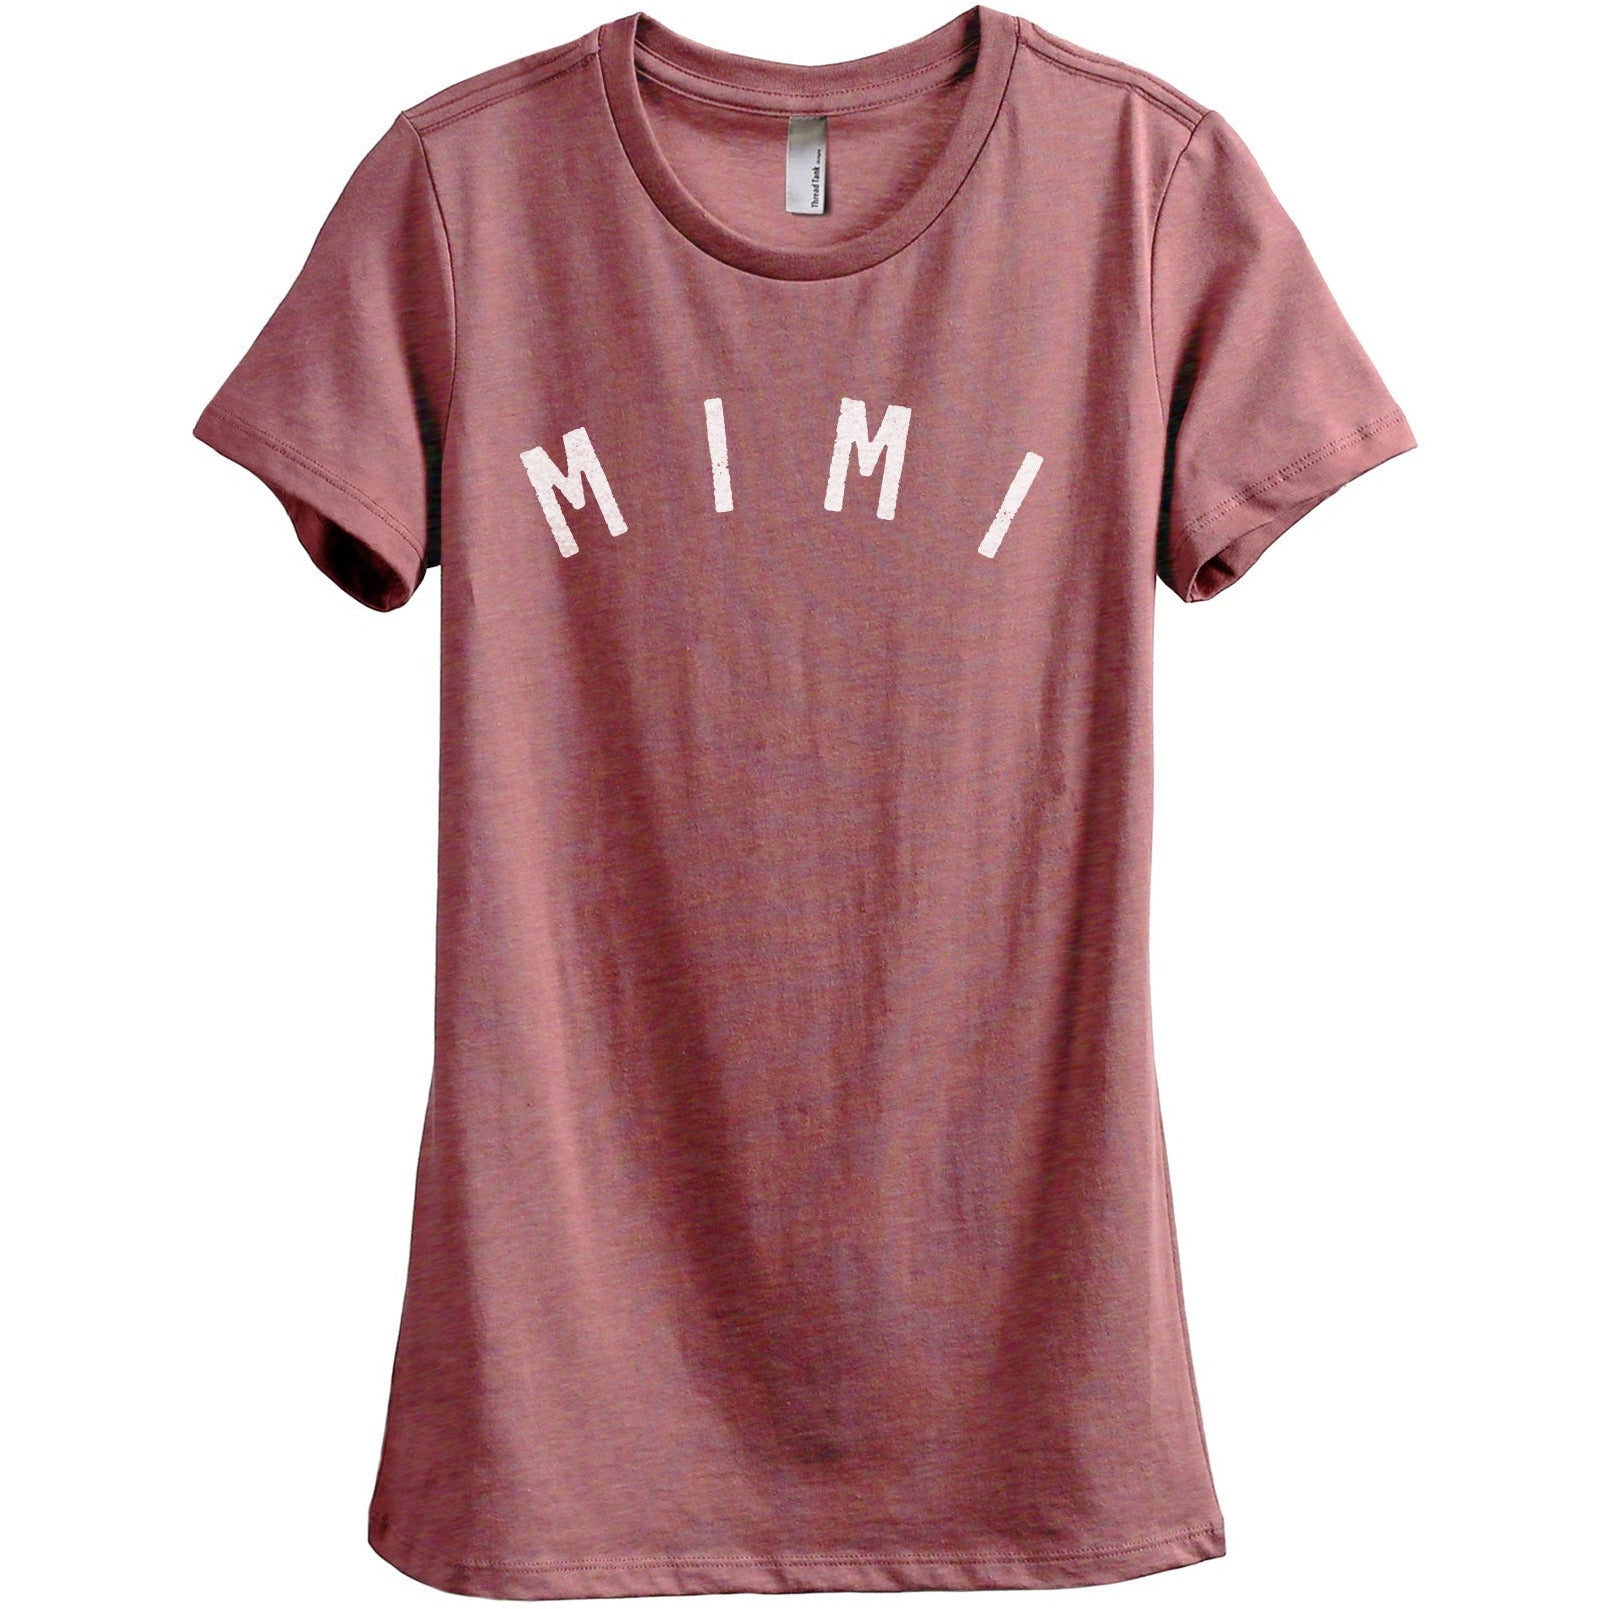 Simply Mimi - Stories You Can Wear